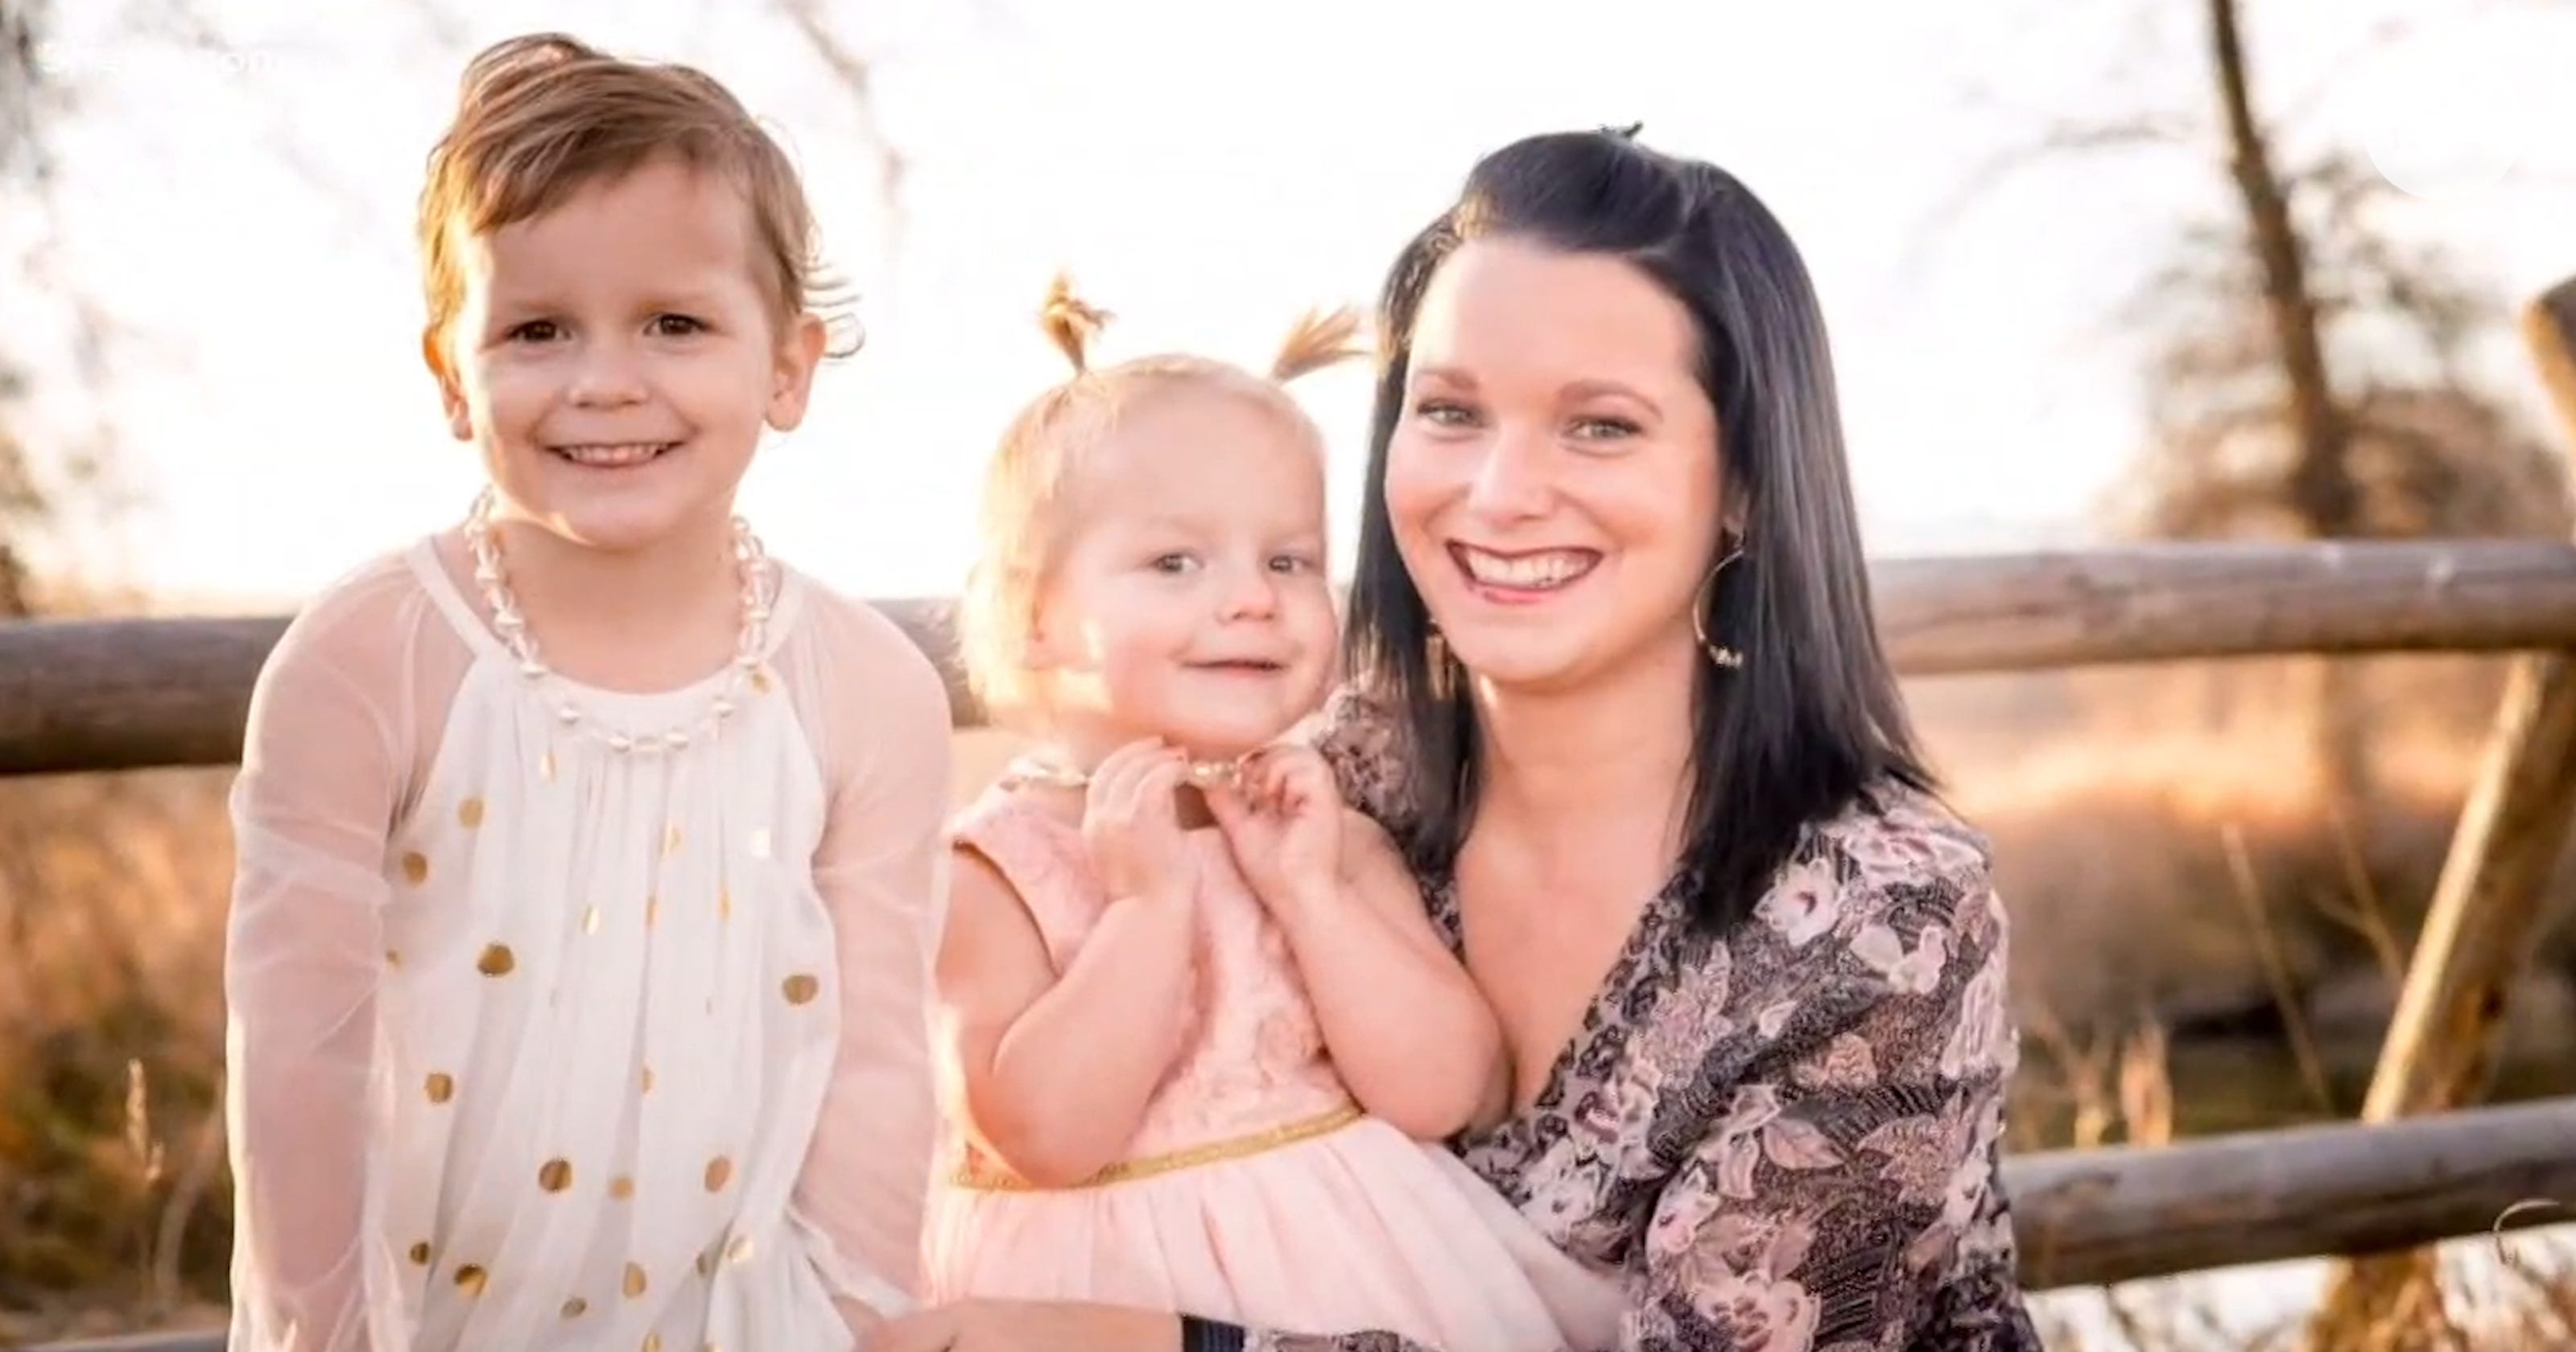 Chris Watts and Shanann Watts: What led to deaths of pregnant wife, kids?